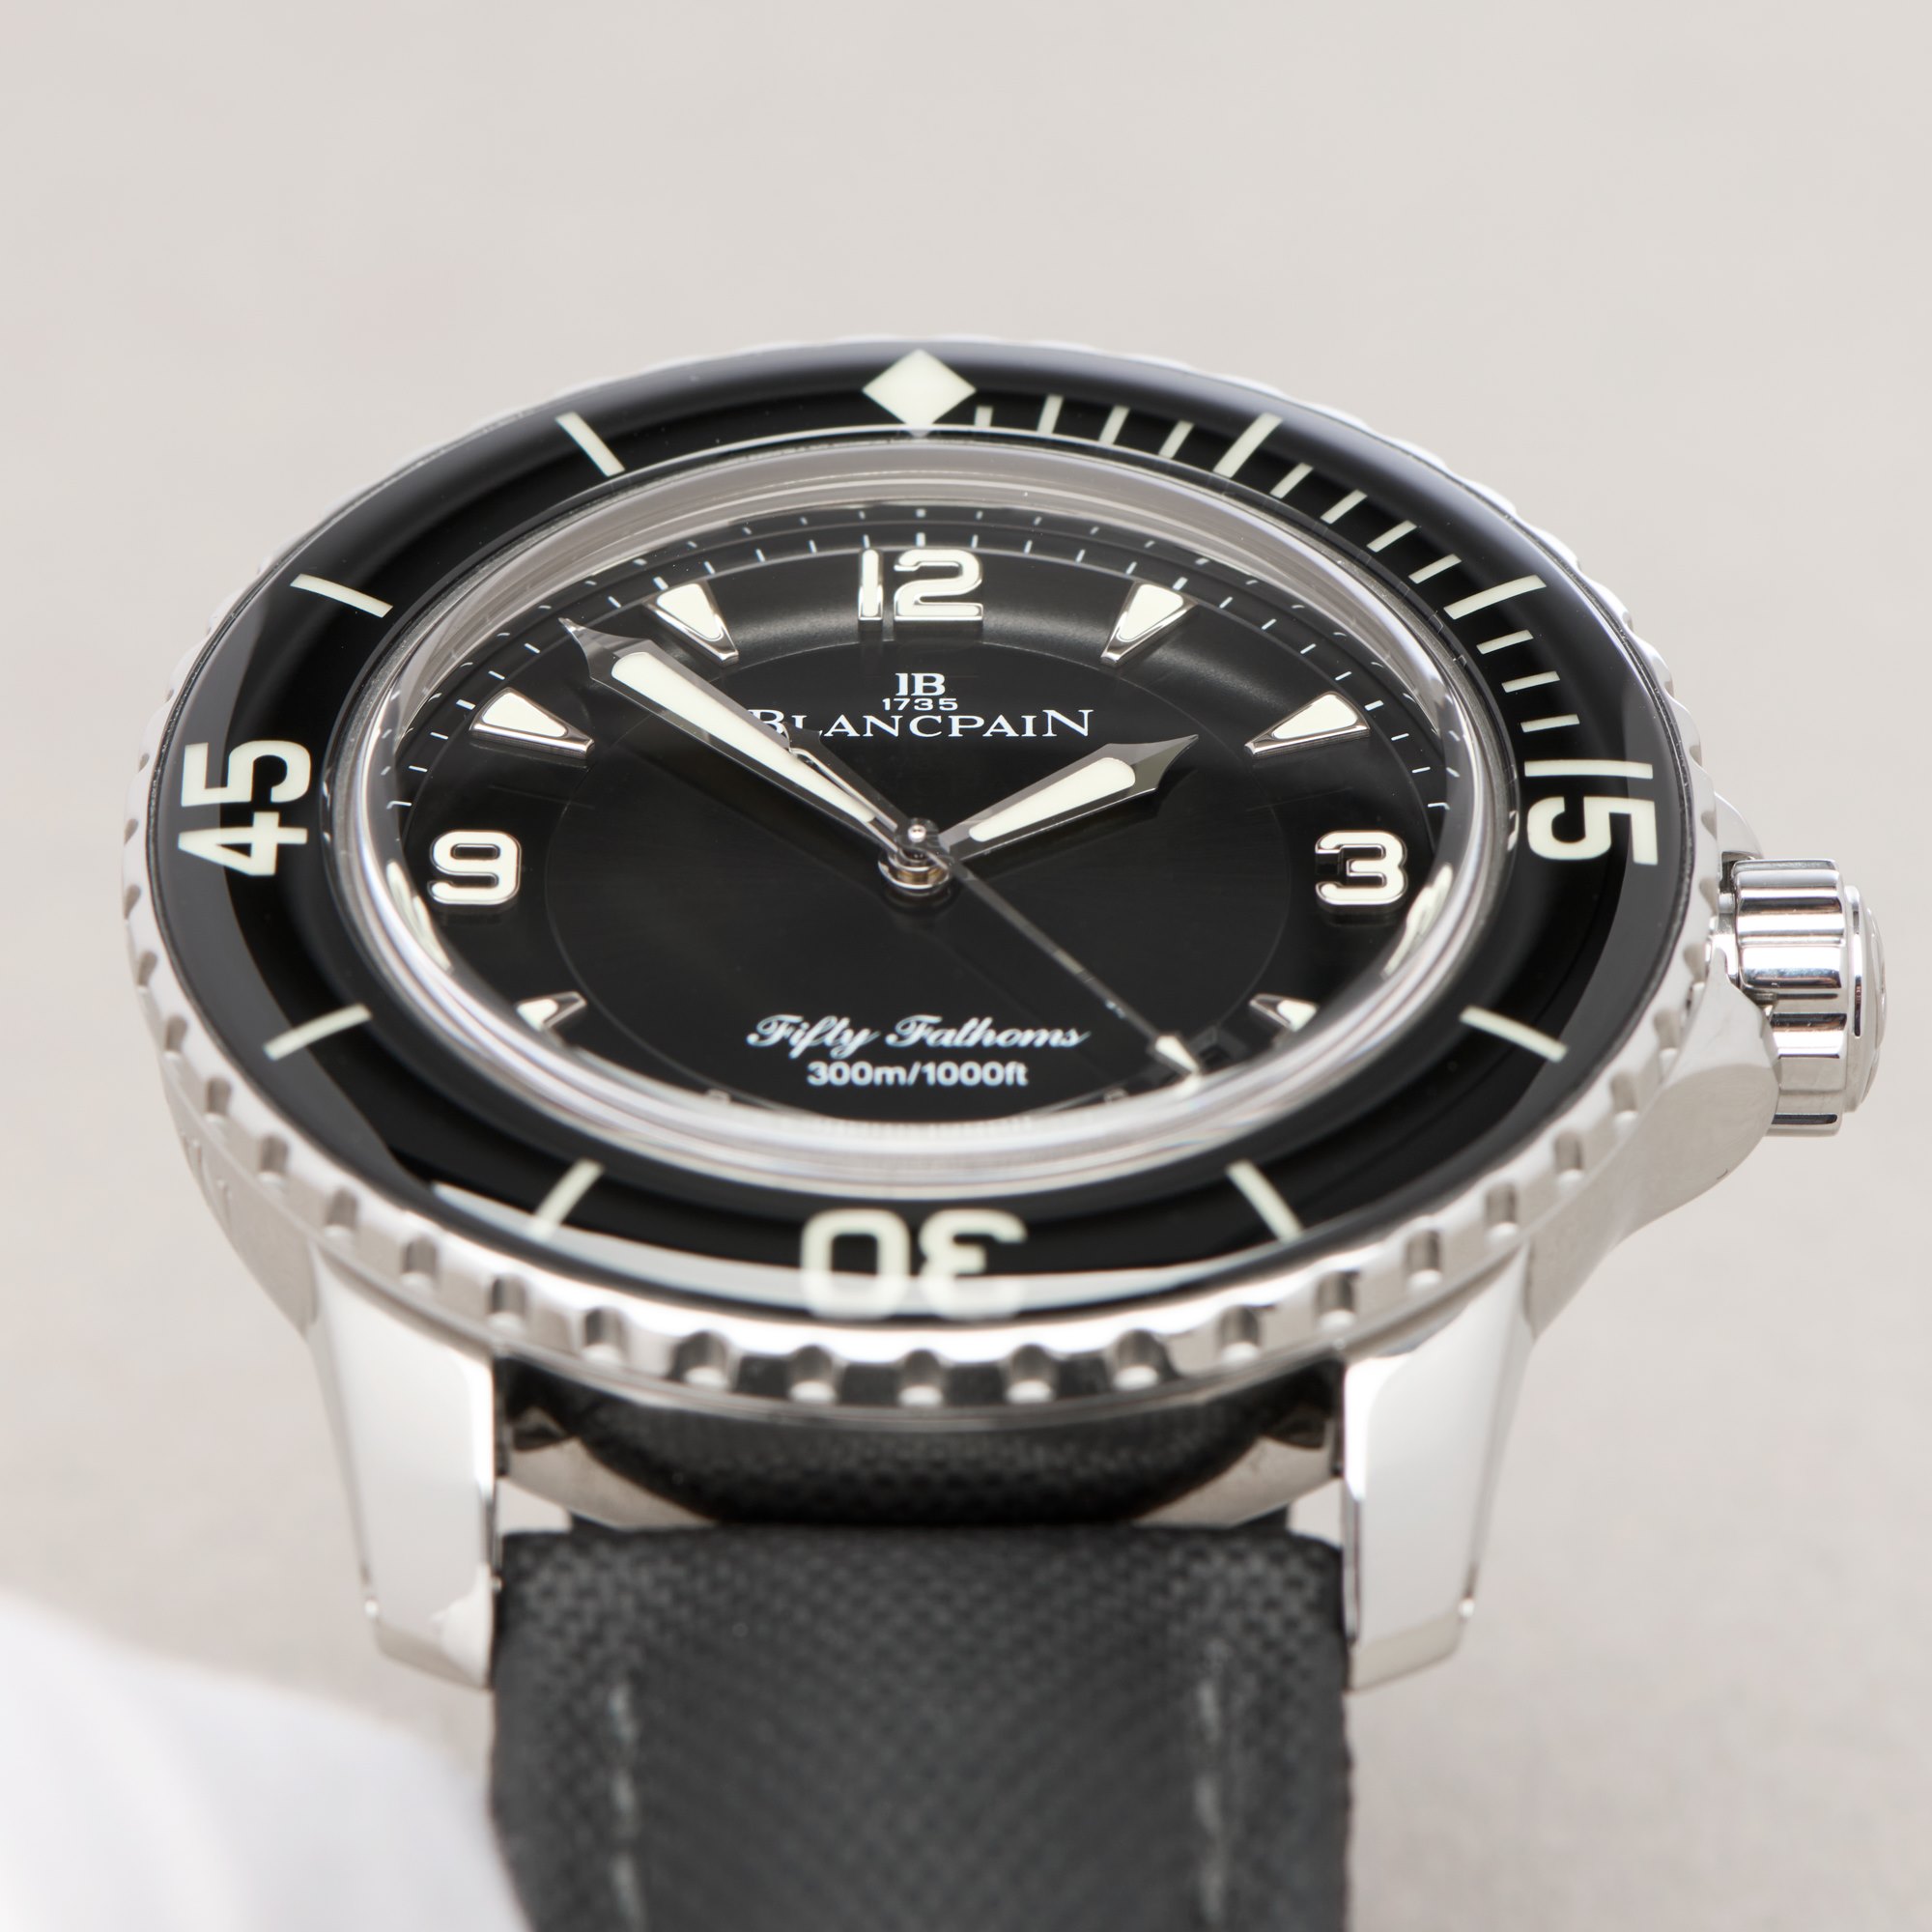 Blancpain Fifty Fathoms Roestvrij Staal 5015-1130-52